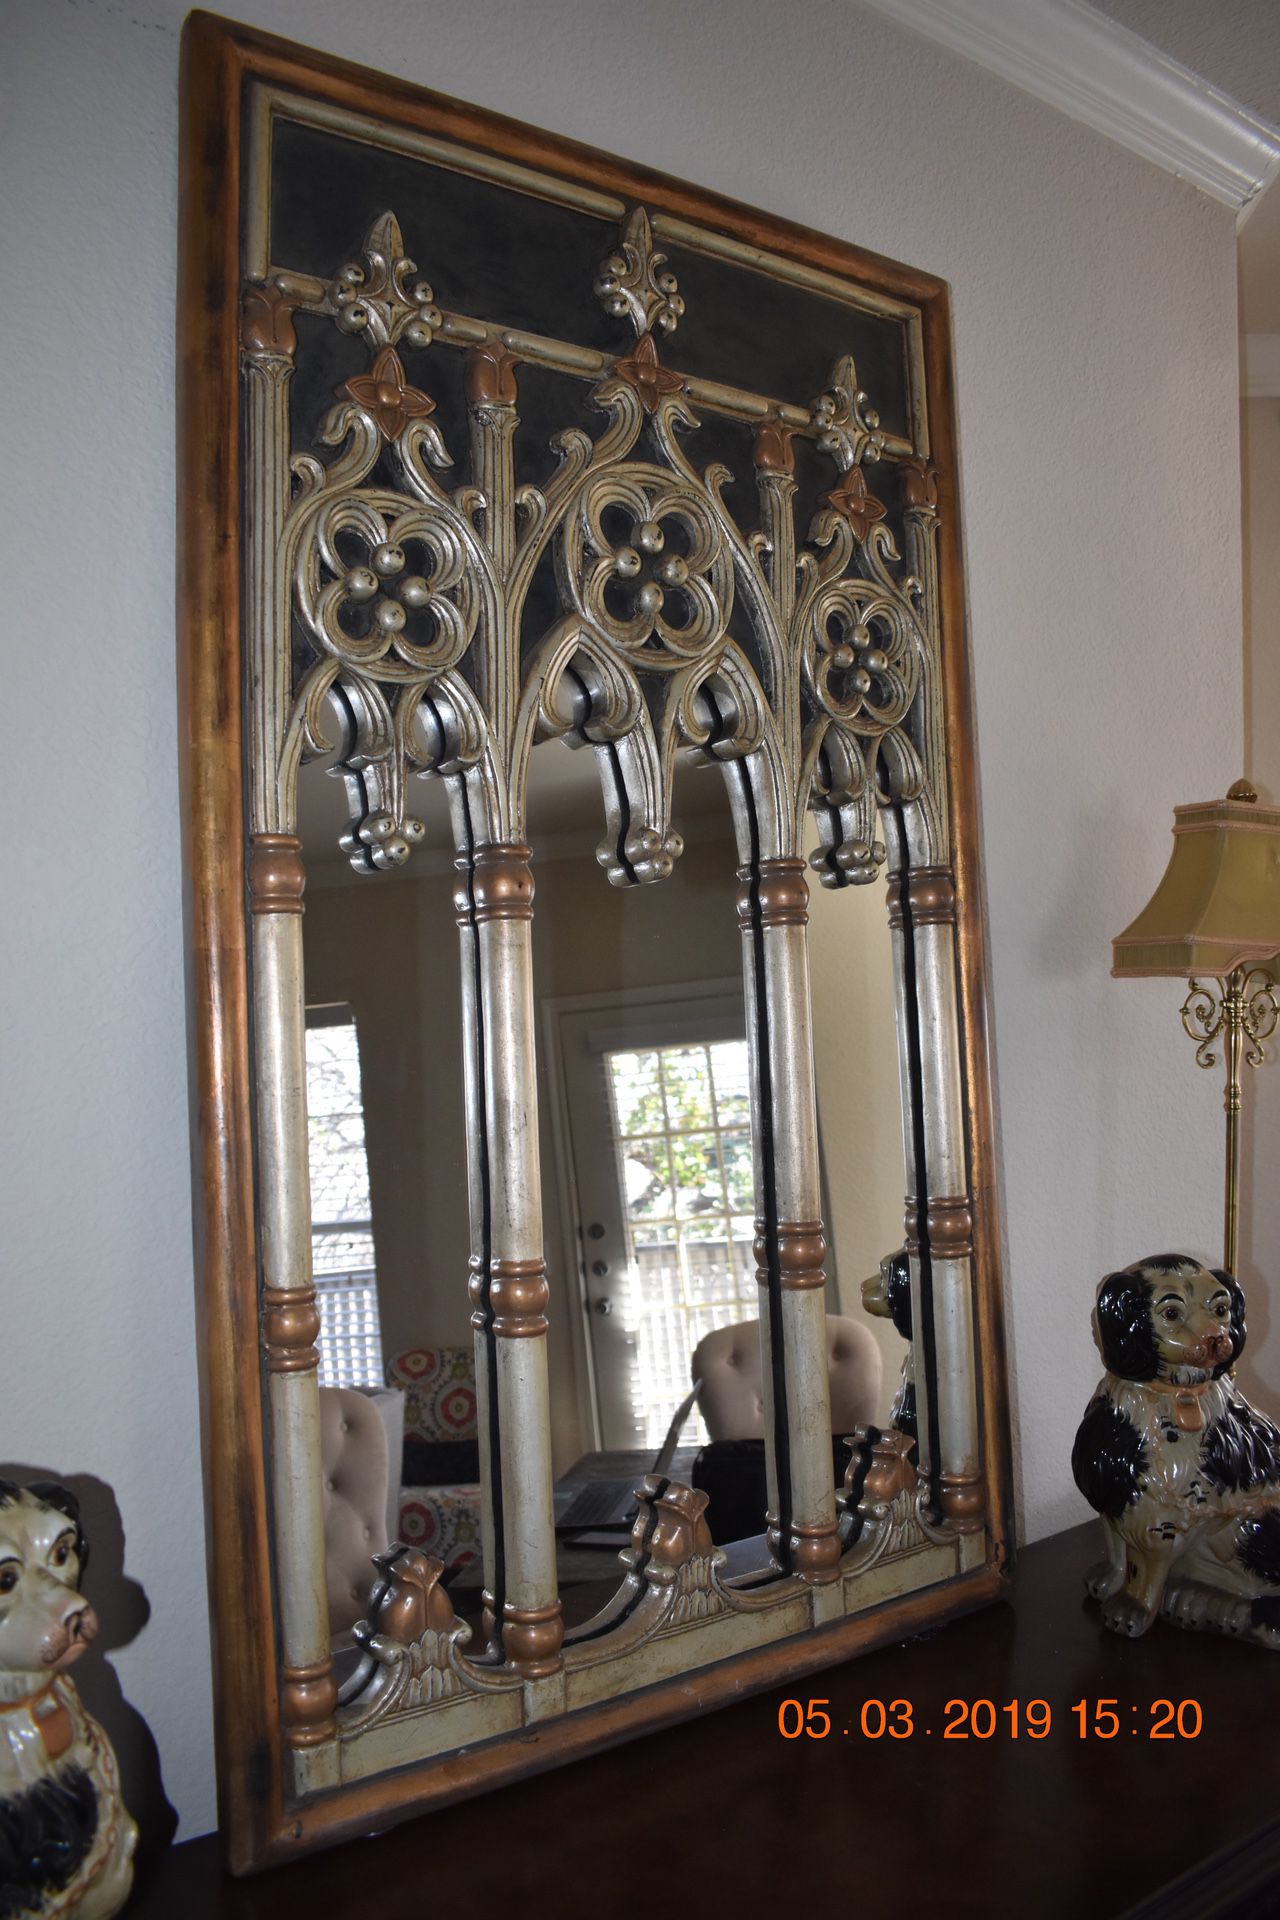 ORNATE HORCHOW DESIGNER GOLD/SILVER MIRROR. DETAILED. MAKES A STATEMENT